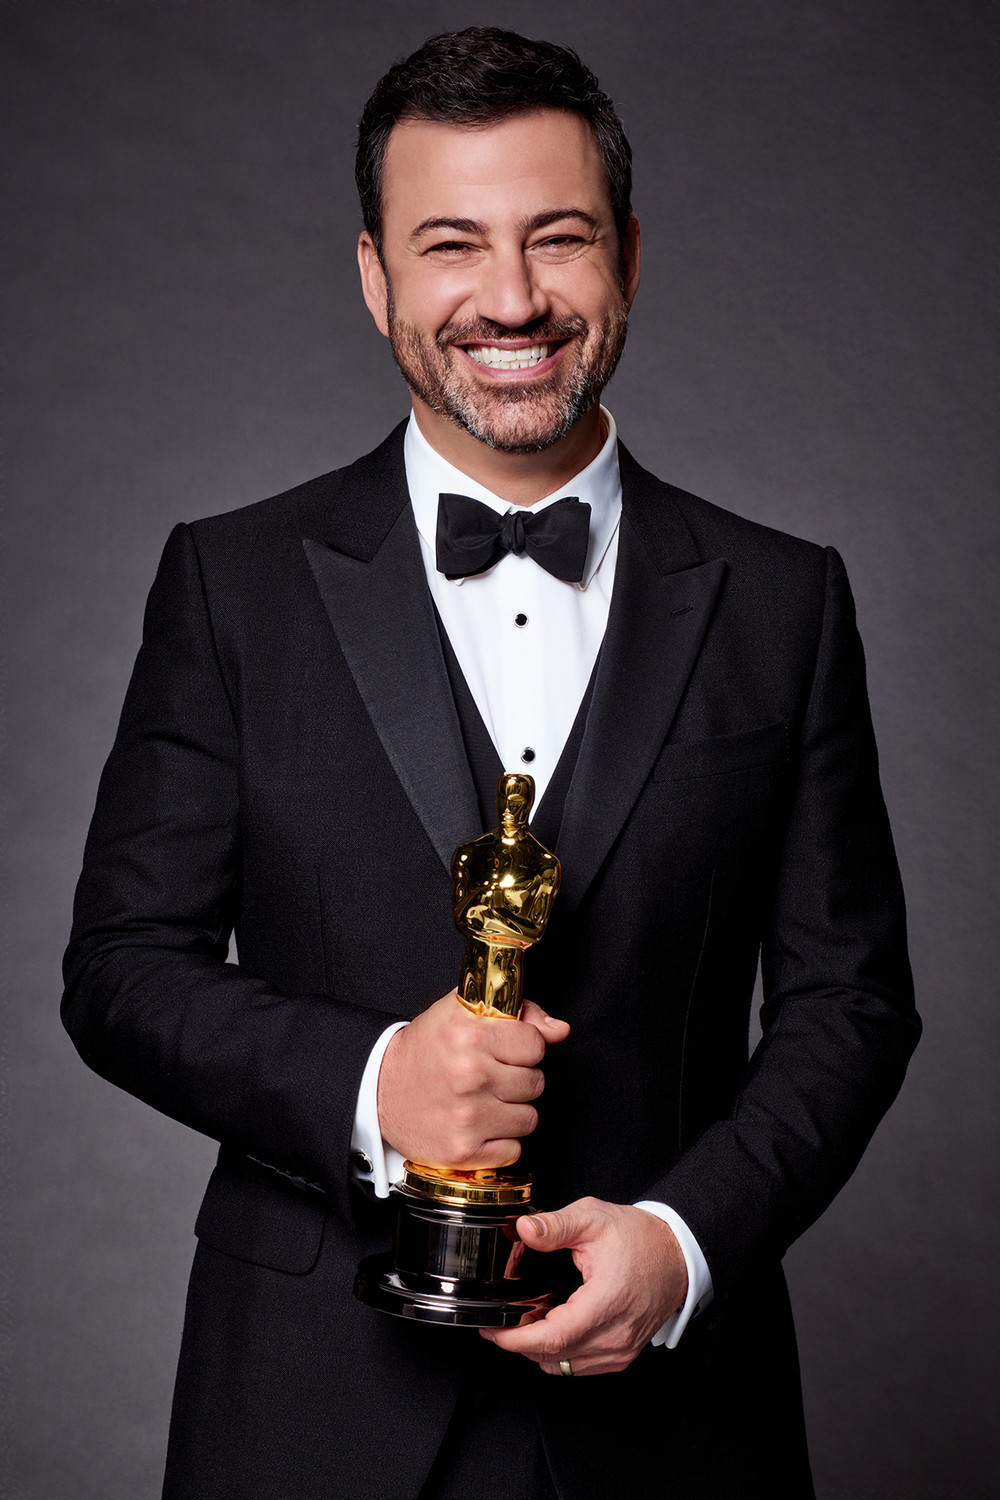 Jimmy Kimmel has moved on from last year’s Best Picture blunder and is ready for his second stint in the Oscar spotlight as host of this year’s awards telecast.